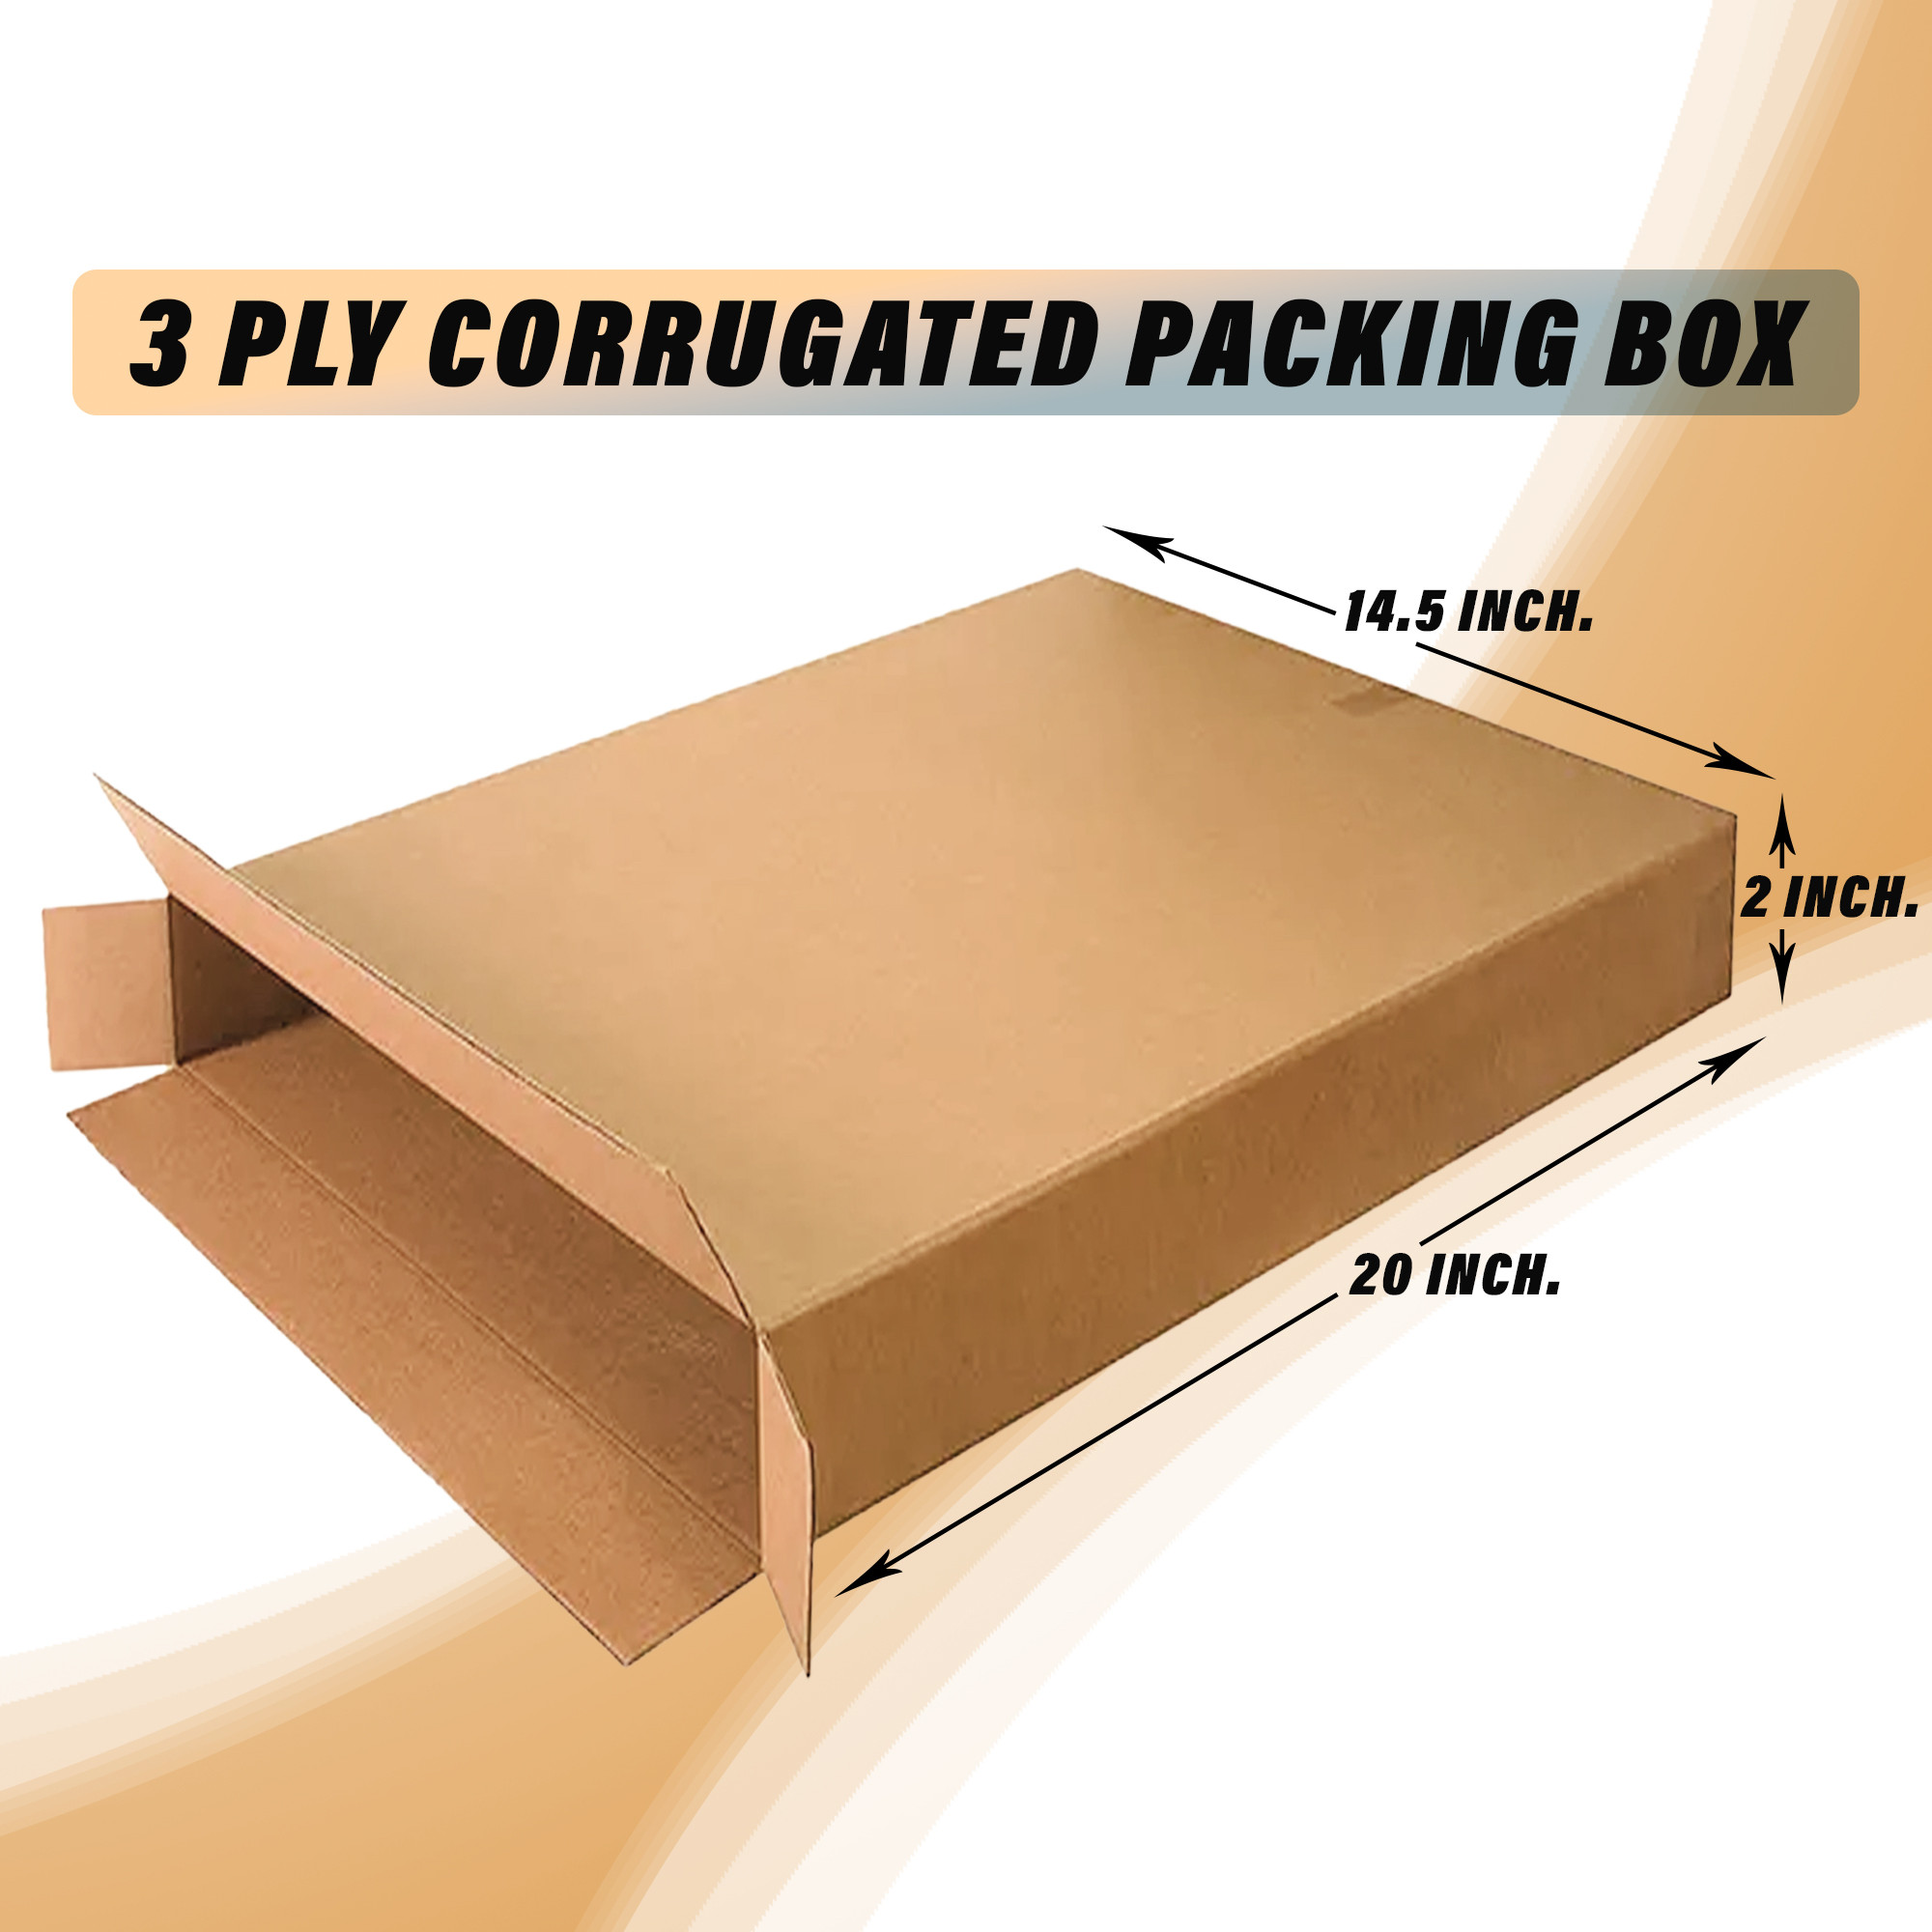 Kuber Industries Corrugated Box | 3 Ply Corrugated Packing Box | Corrugated for Shipping | Corrugated for Courier & Goods Transportation | L 14.5 x W 2 x H 20 Inch| Brown